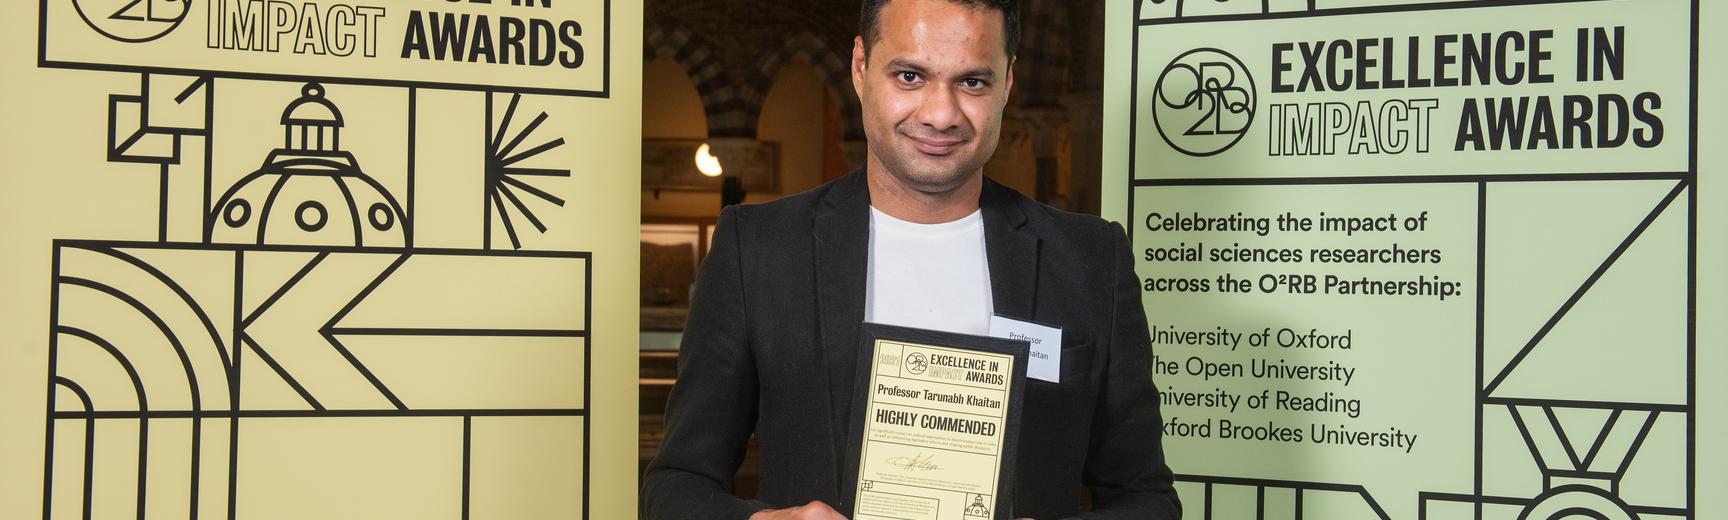 Professor Tarunabh Khaitan holds his Highly Commended impact award, flanked by event branding at the awards reception